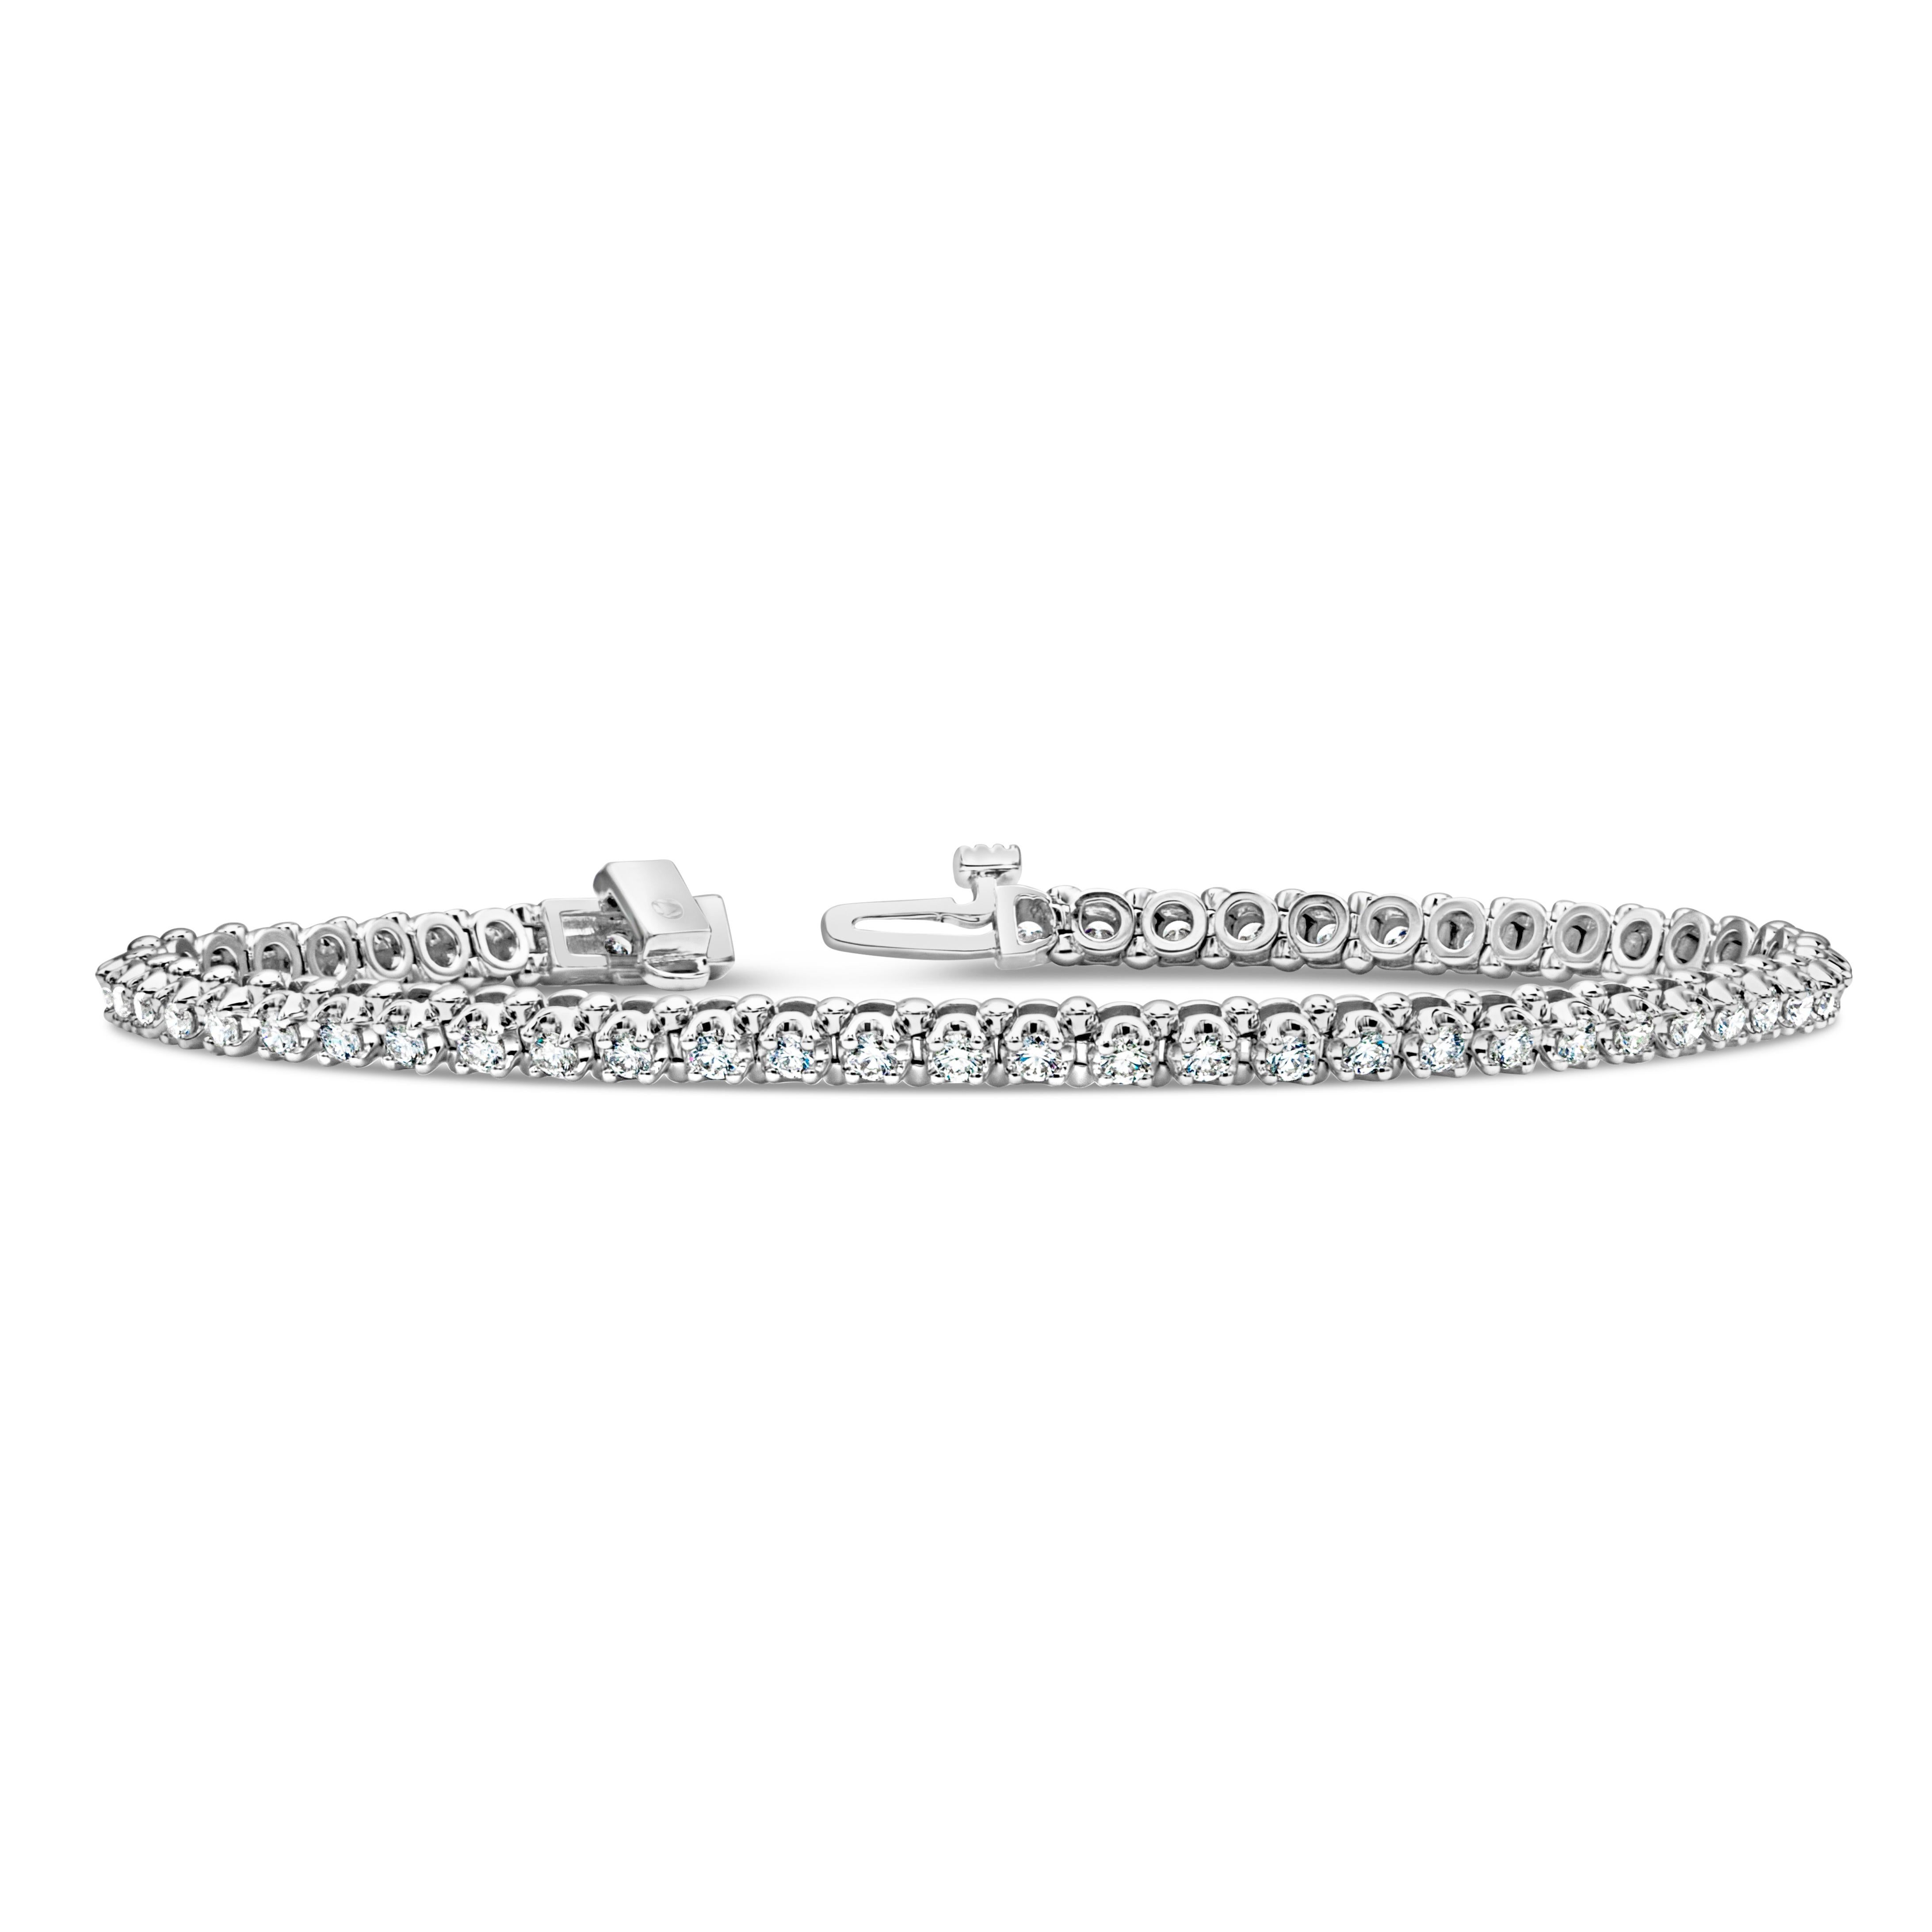 A classic tennis bracelet style showcasing 55 brilliant round diamonds weighing 1.73 carats total, F Color and VS2 in Clarity. 2mm Width and 7 inches in Length, Made with 14K White Gold.

Roman Malakov is a custom house, specializing in creating